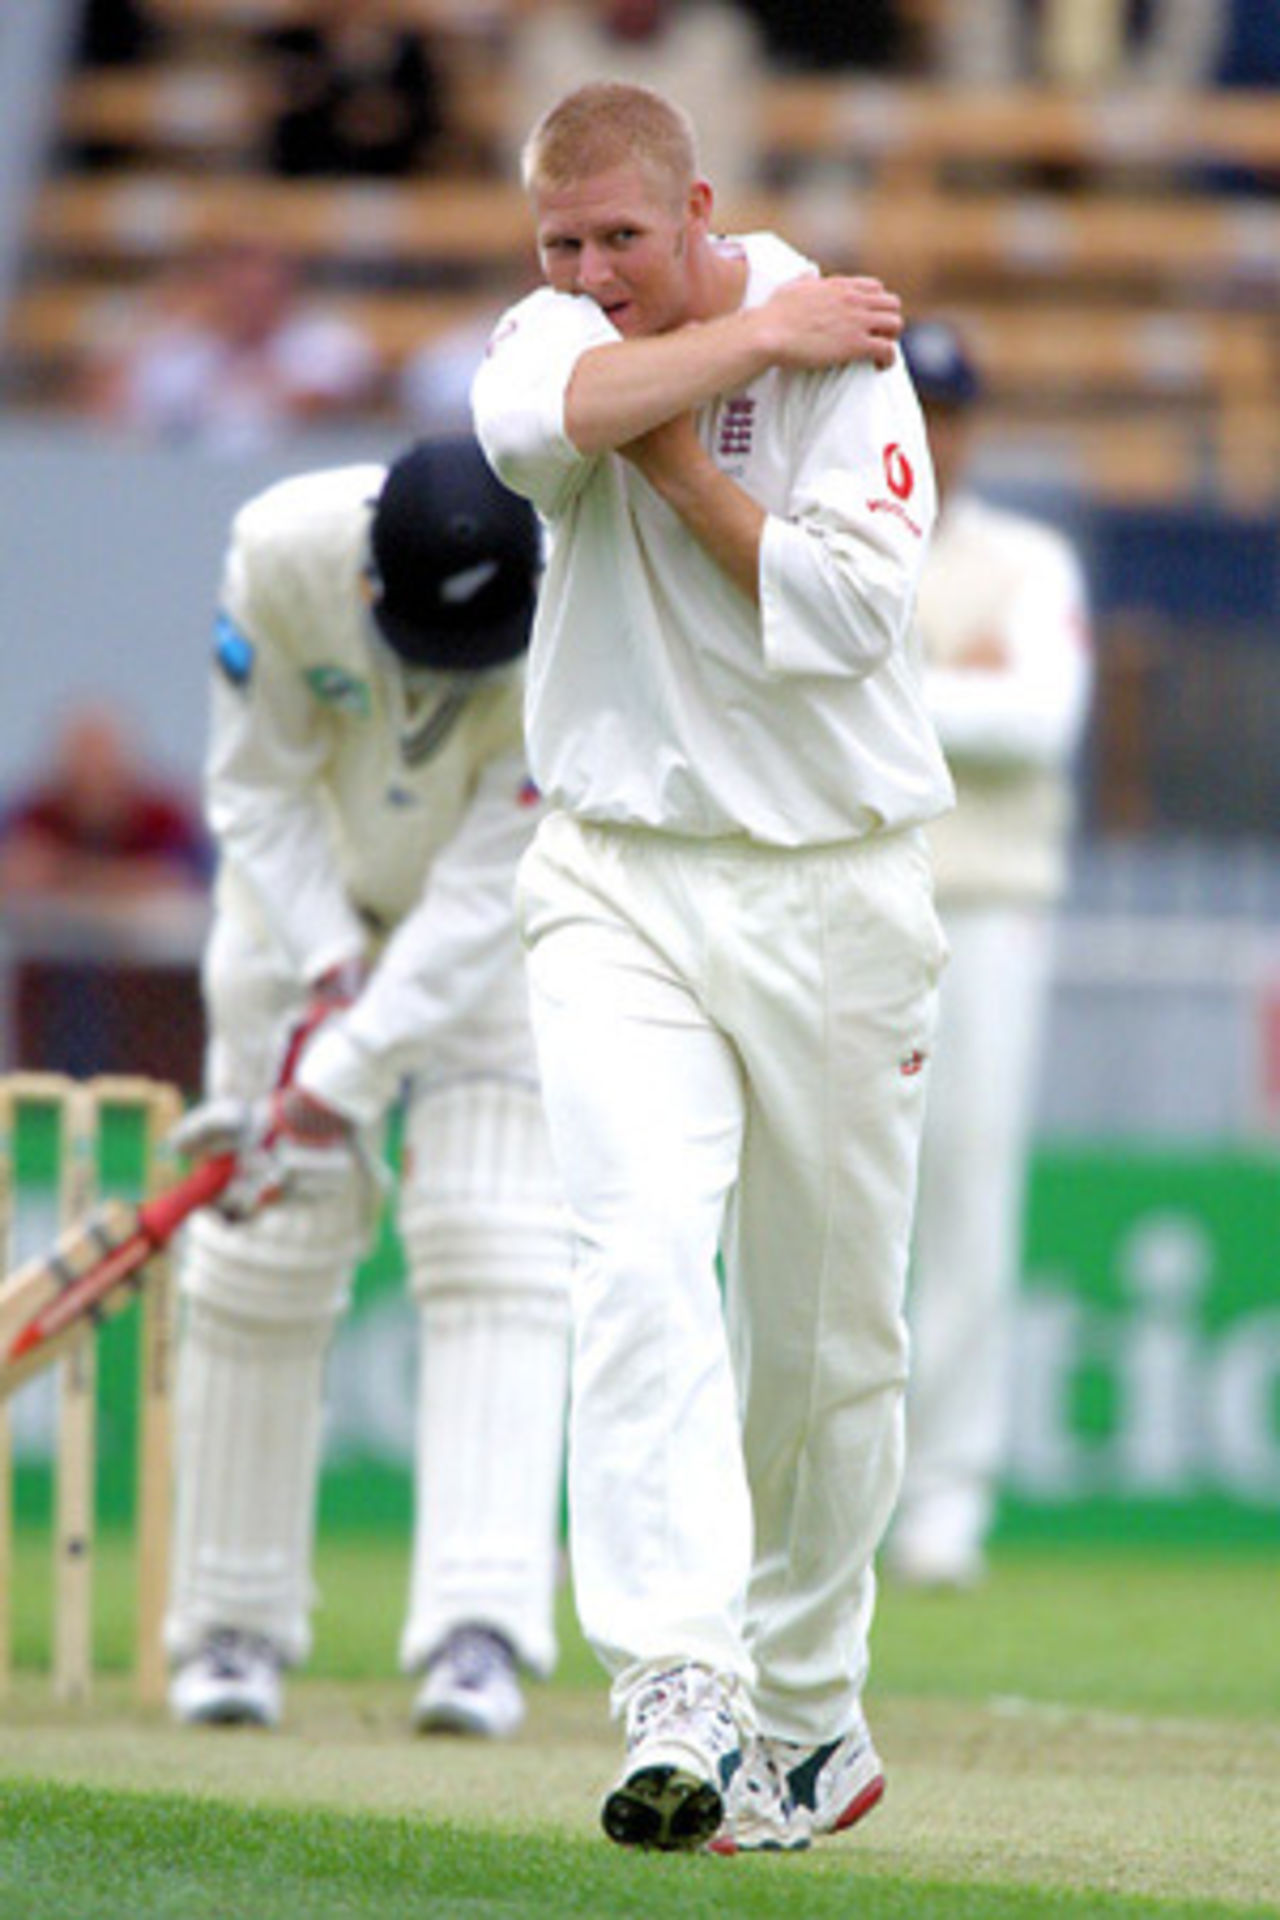 England bowler Matthew Hoggard returns to his mark after delivering a ball to New Zealand batsman Daniel Vettori during his first day spell of 1-6 from three overs. 1st Test: New Zealand v England at Jade Stadium, Christchurch, 13-17 March 2002 (13 March 2002).